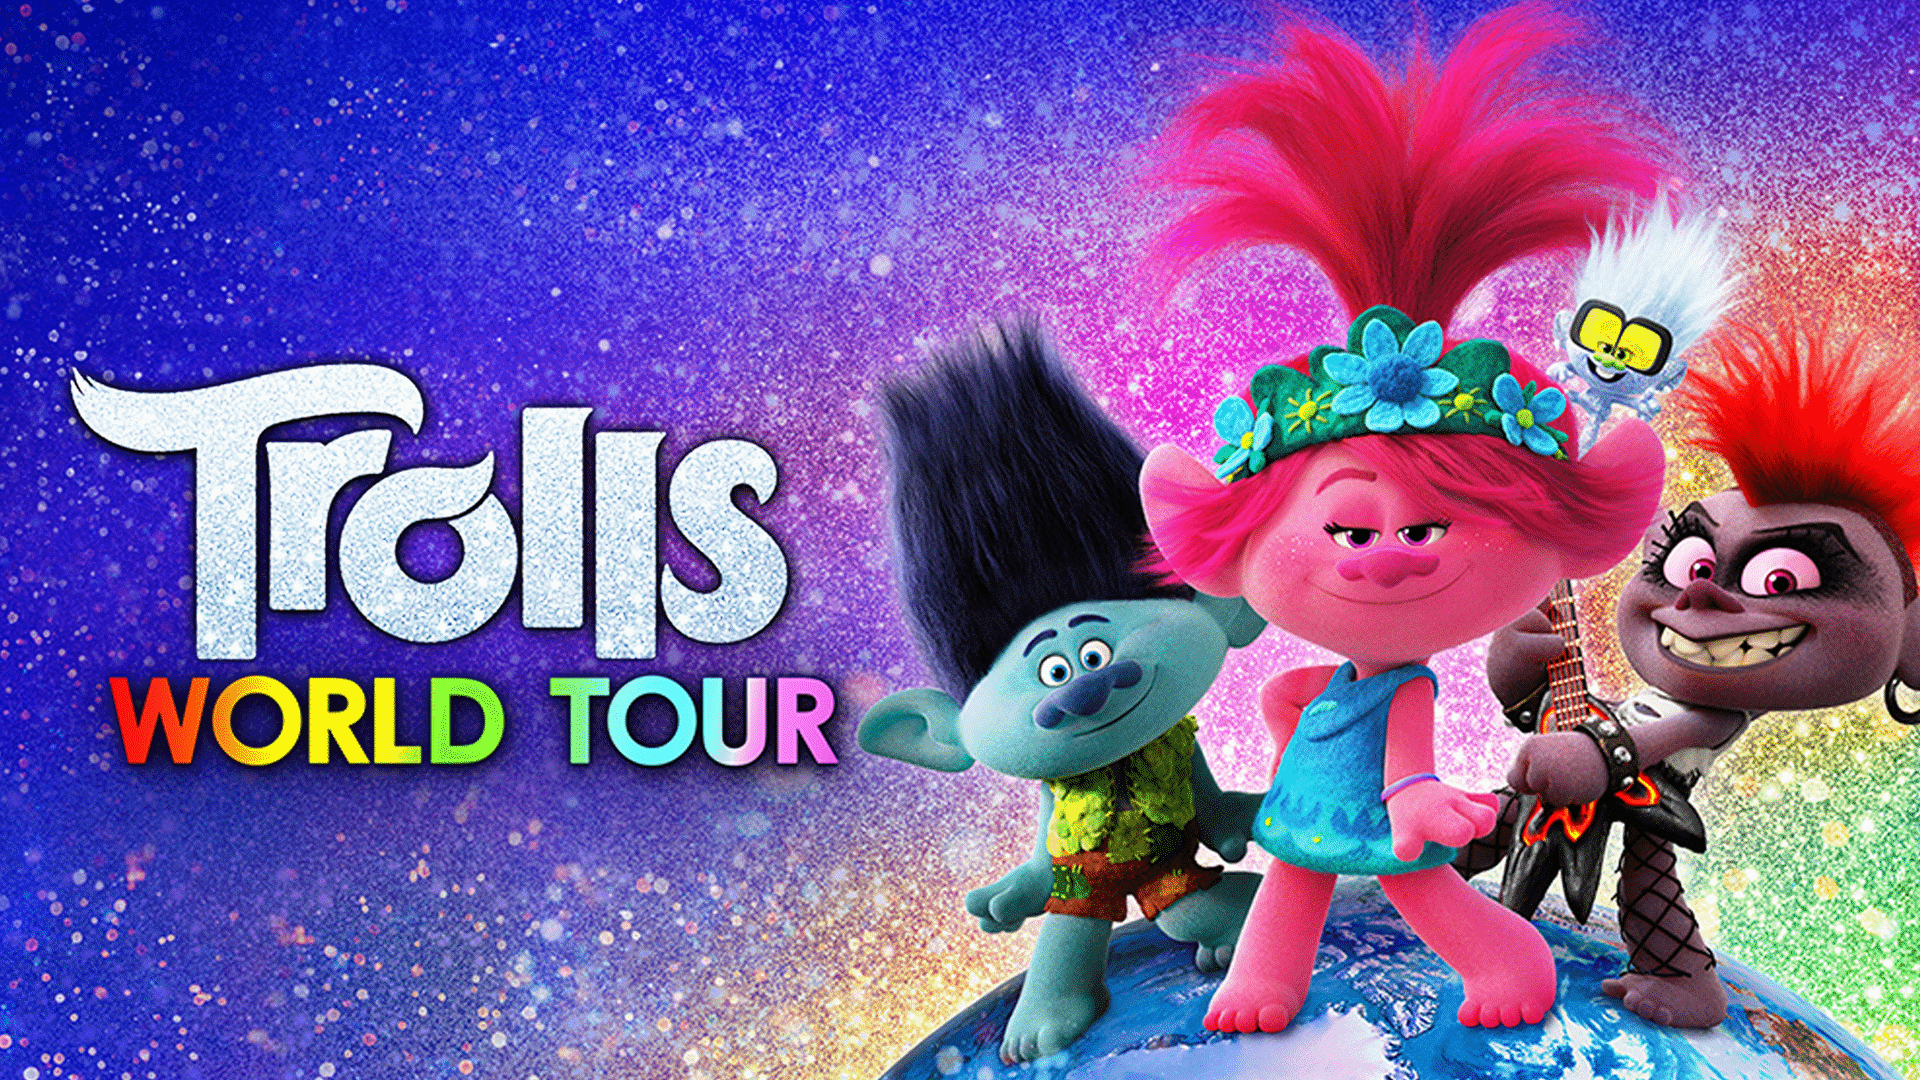 Trolls World Tour - When the Queen and King o... - ClickView